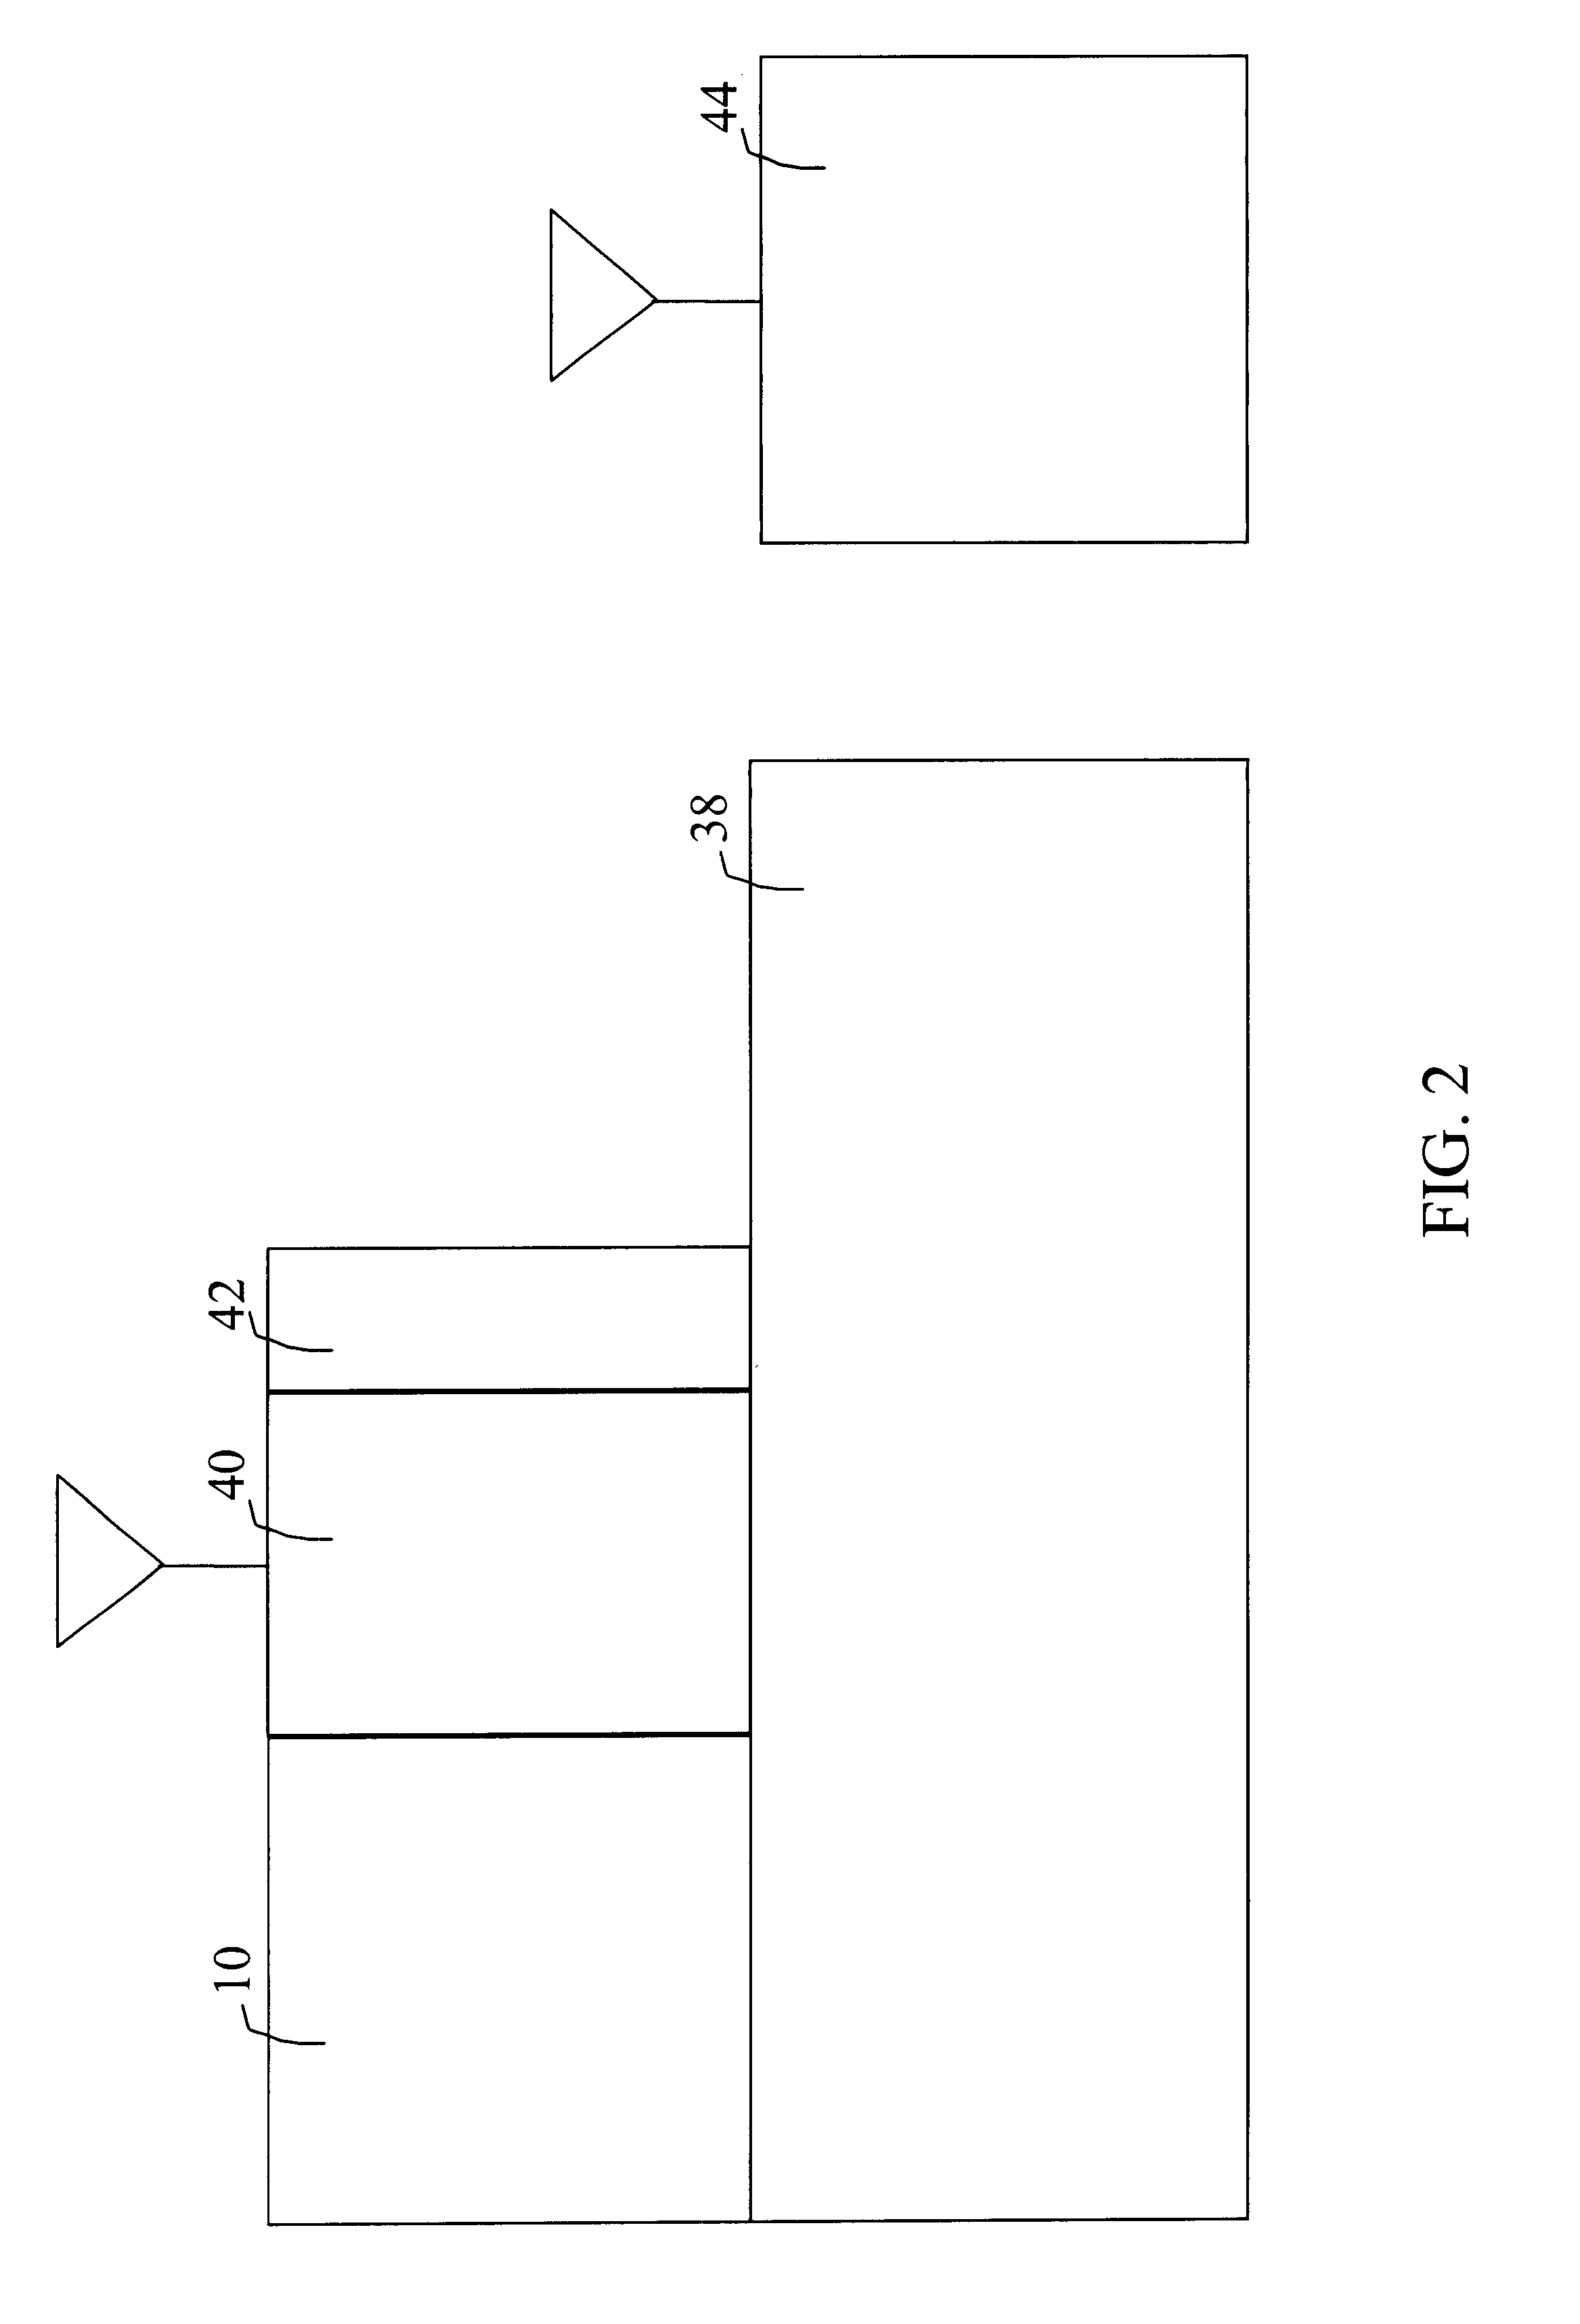 Flow measuring device based on predetermine class of liquid